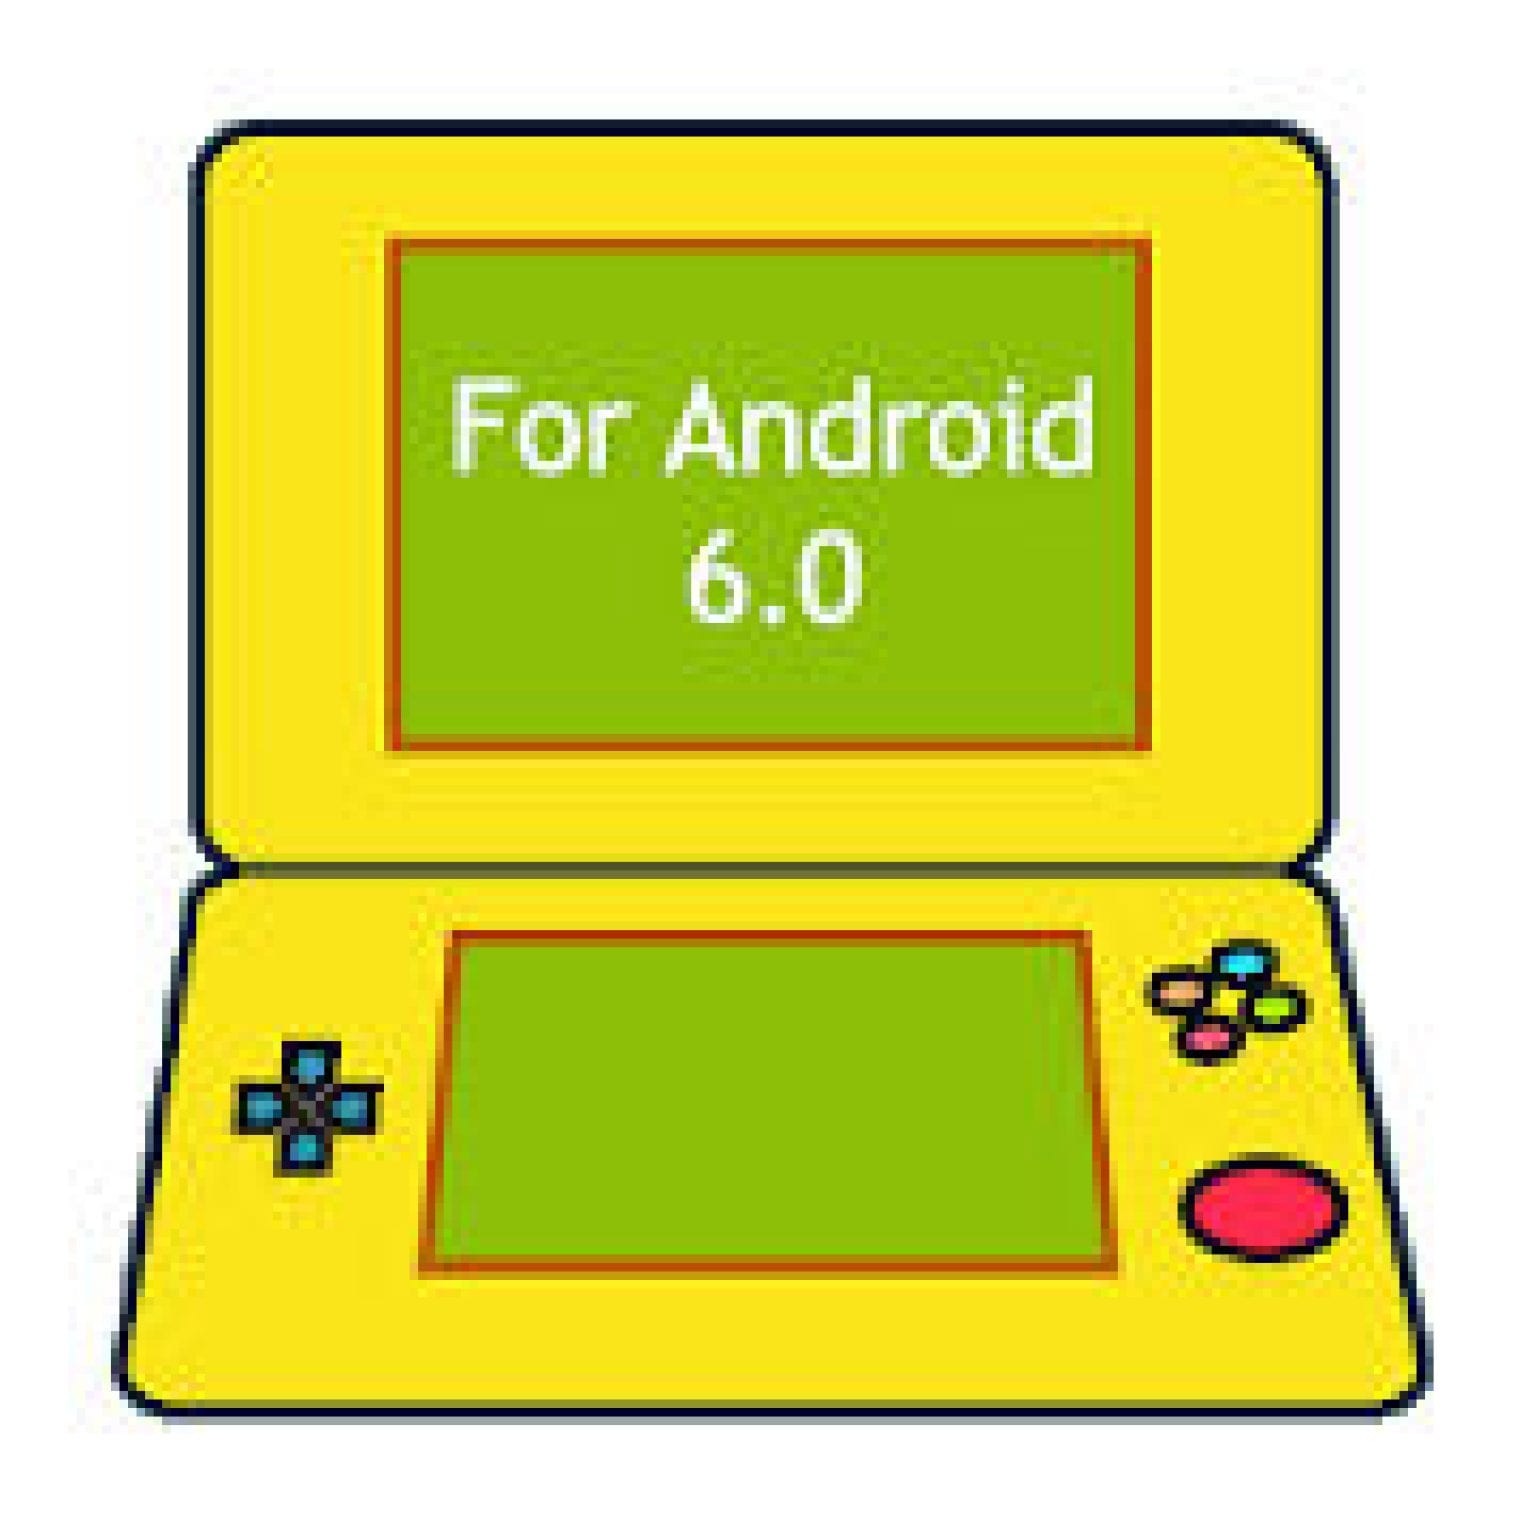 nds emulator ios download free